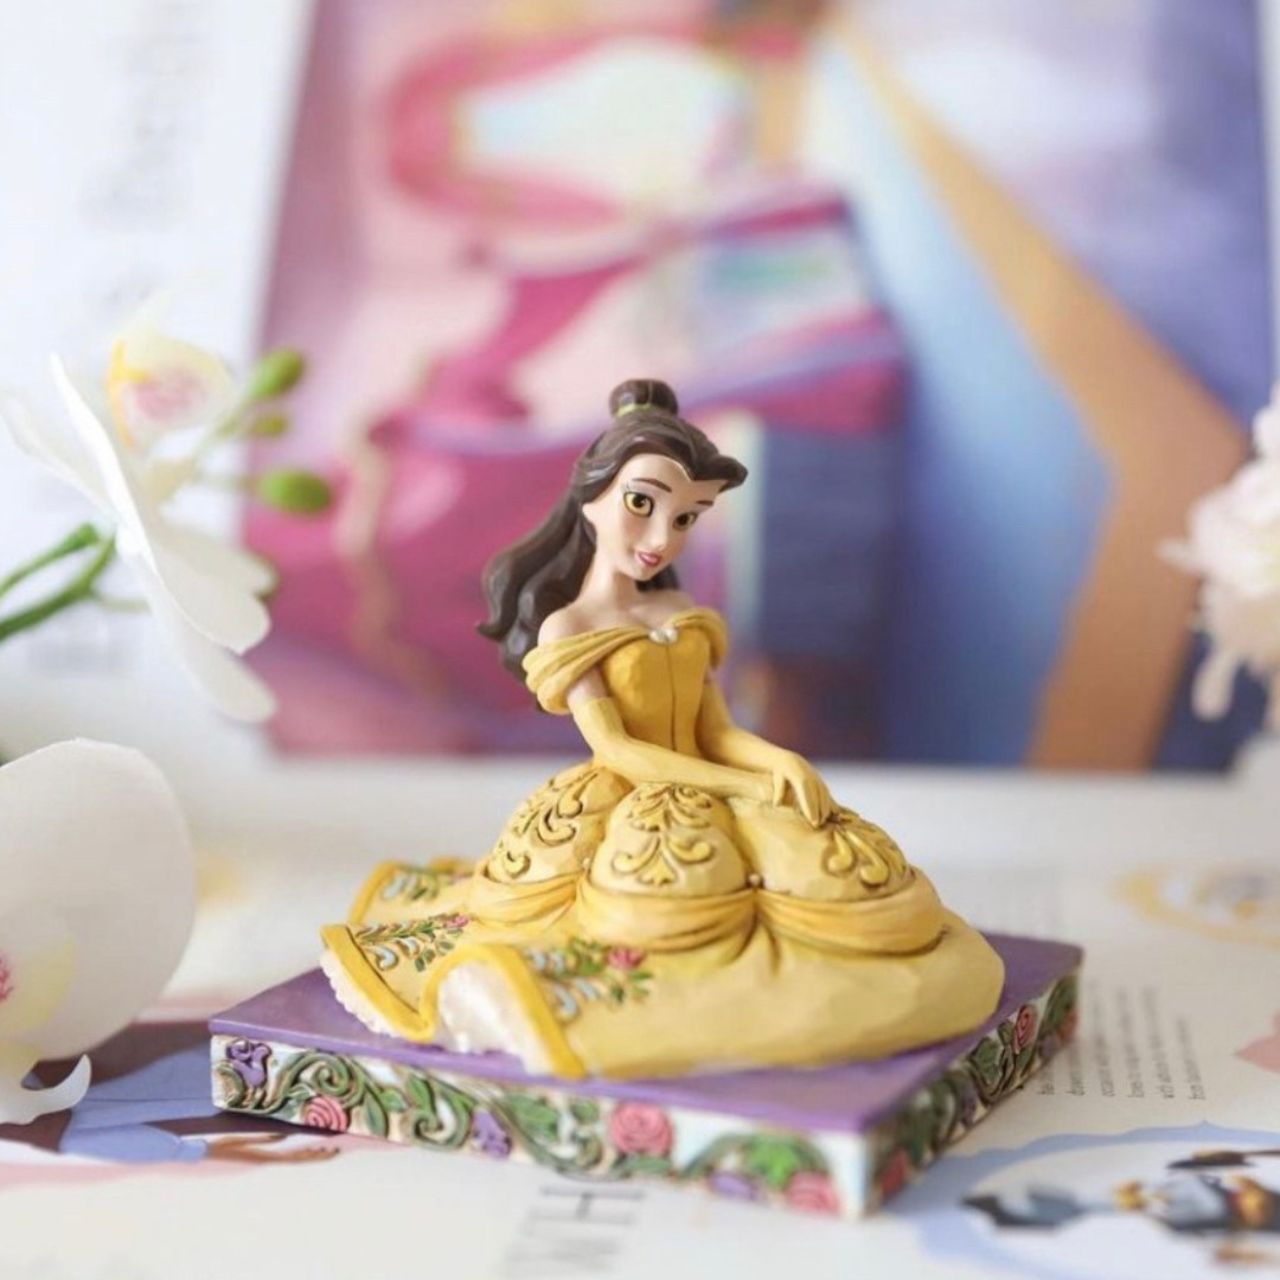 Disney Beauty and the Beast Be Kind Belle Figurine by Jim Shore  Dressed for the ball in a golden gown decorated in exquisite detail, the striking personality pose from artist Jim Shore depicts the radiant beauty of Belle from the Disney classic Beauty and the Beast.